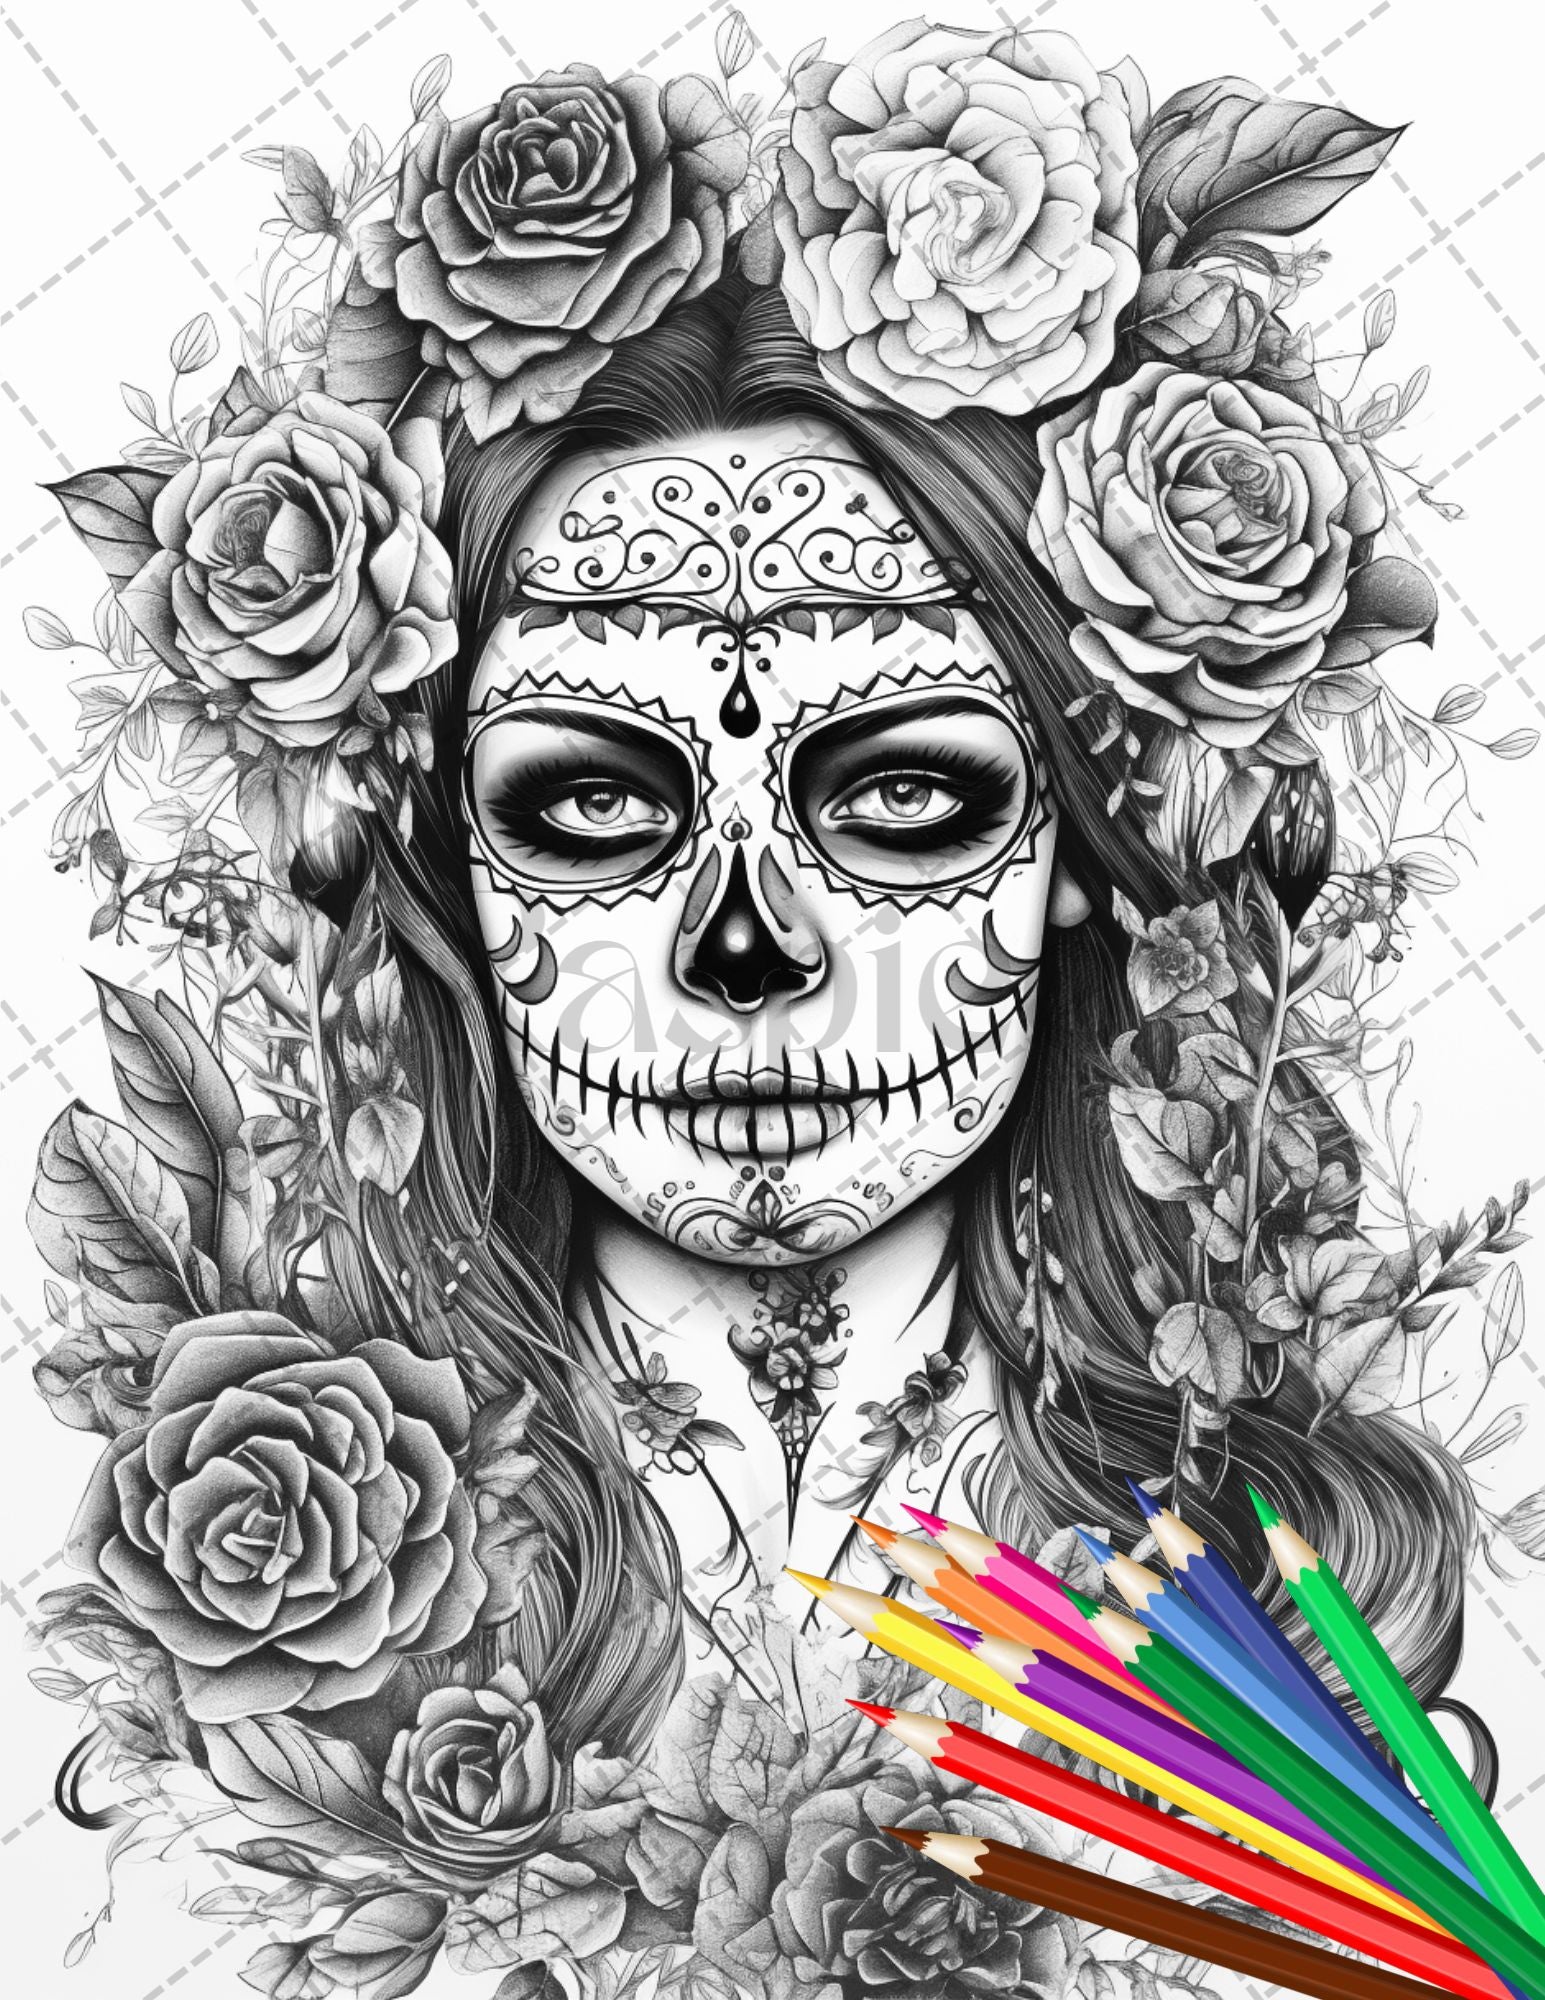 30 Black Bride Coloring Pages for Adults, Black Women, Instant Download,  Grayscale Coloring Book, Printable PDF File 